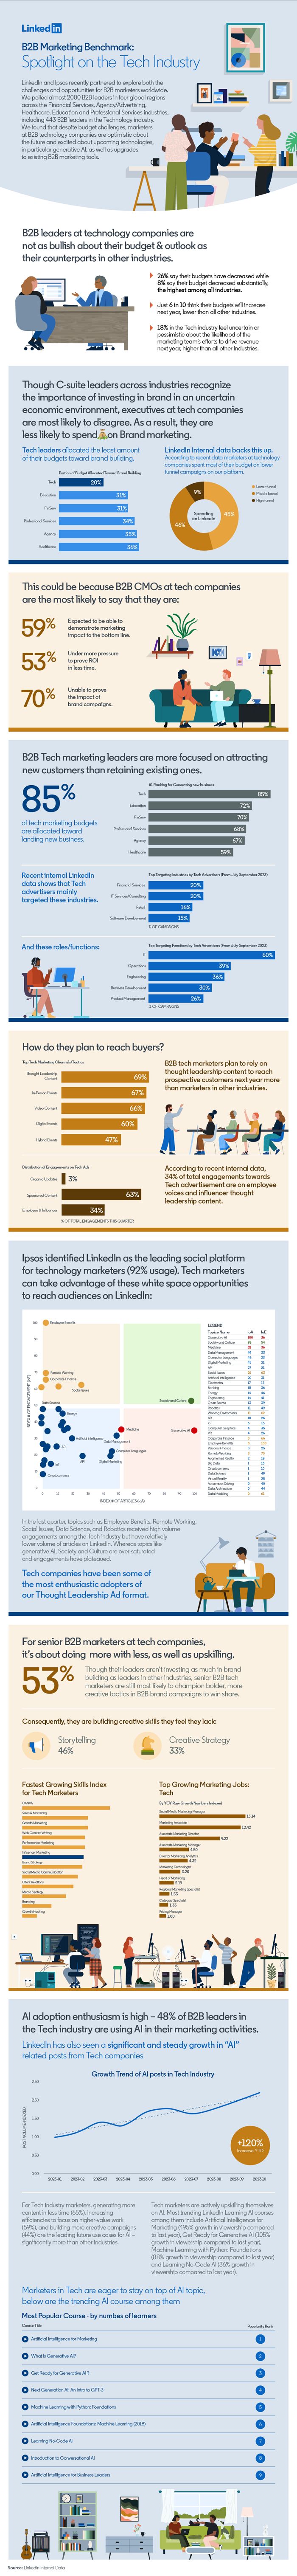 LinkedIn Tech Industry infographic